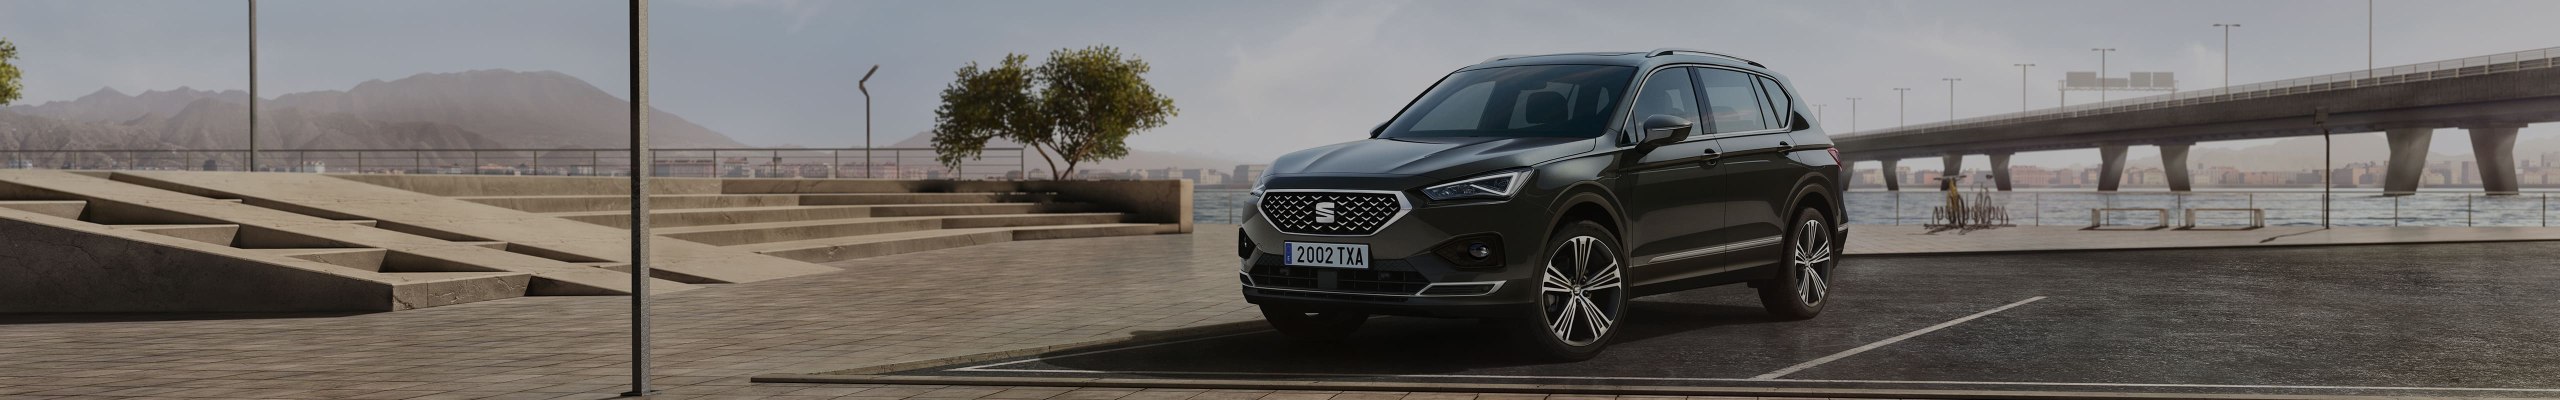 SEAT Tarraco 2021 SUV in dark camouflage colour front side view parked